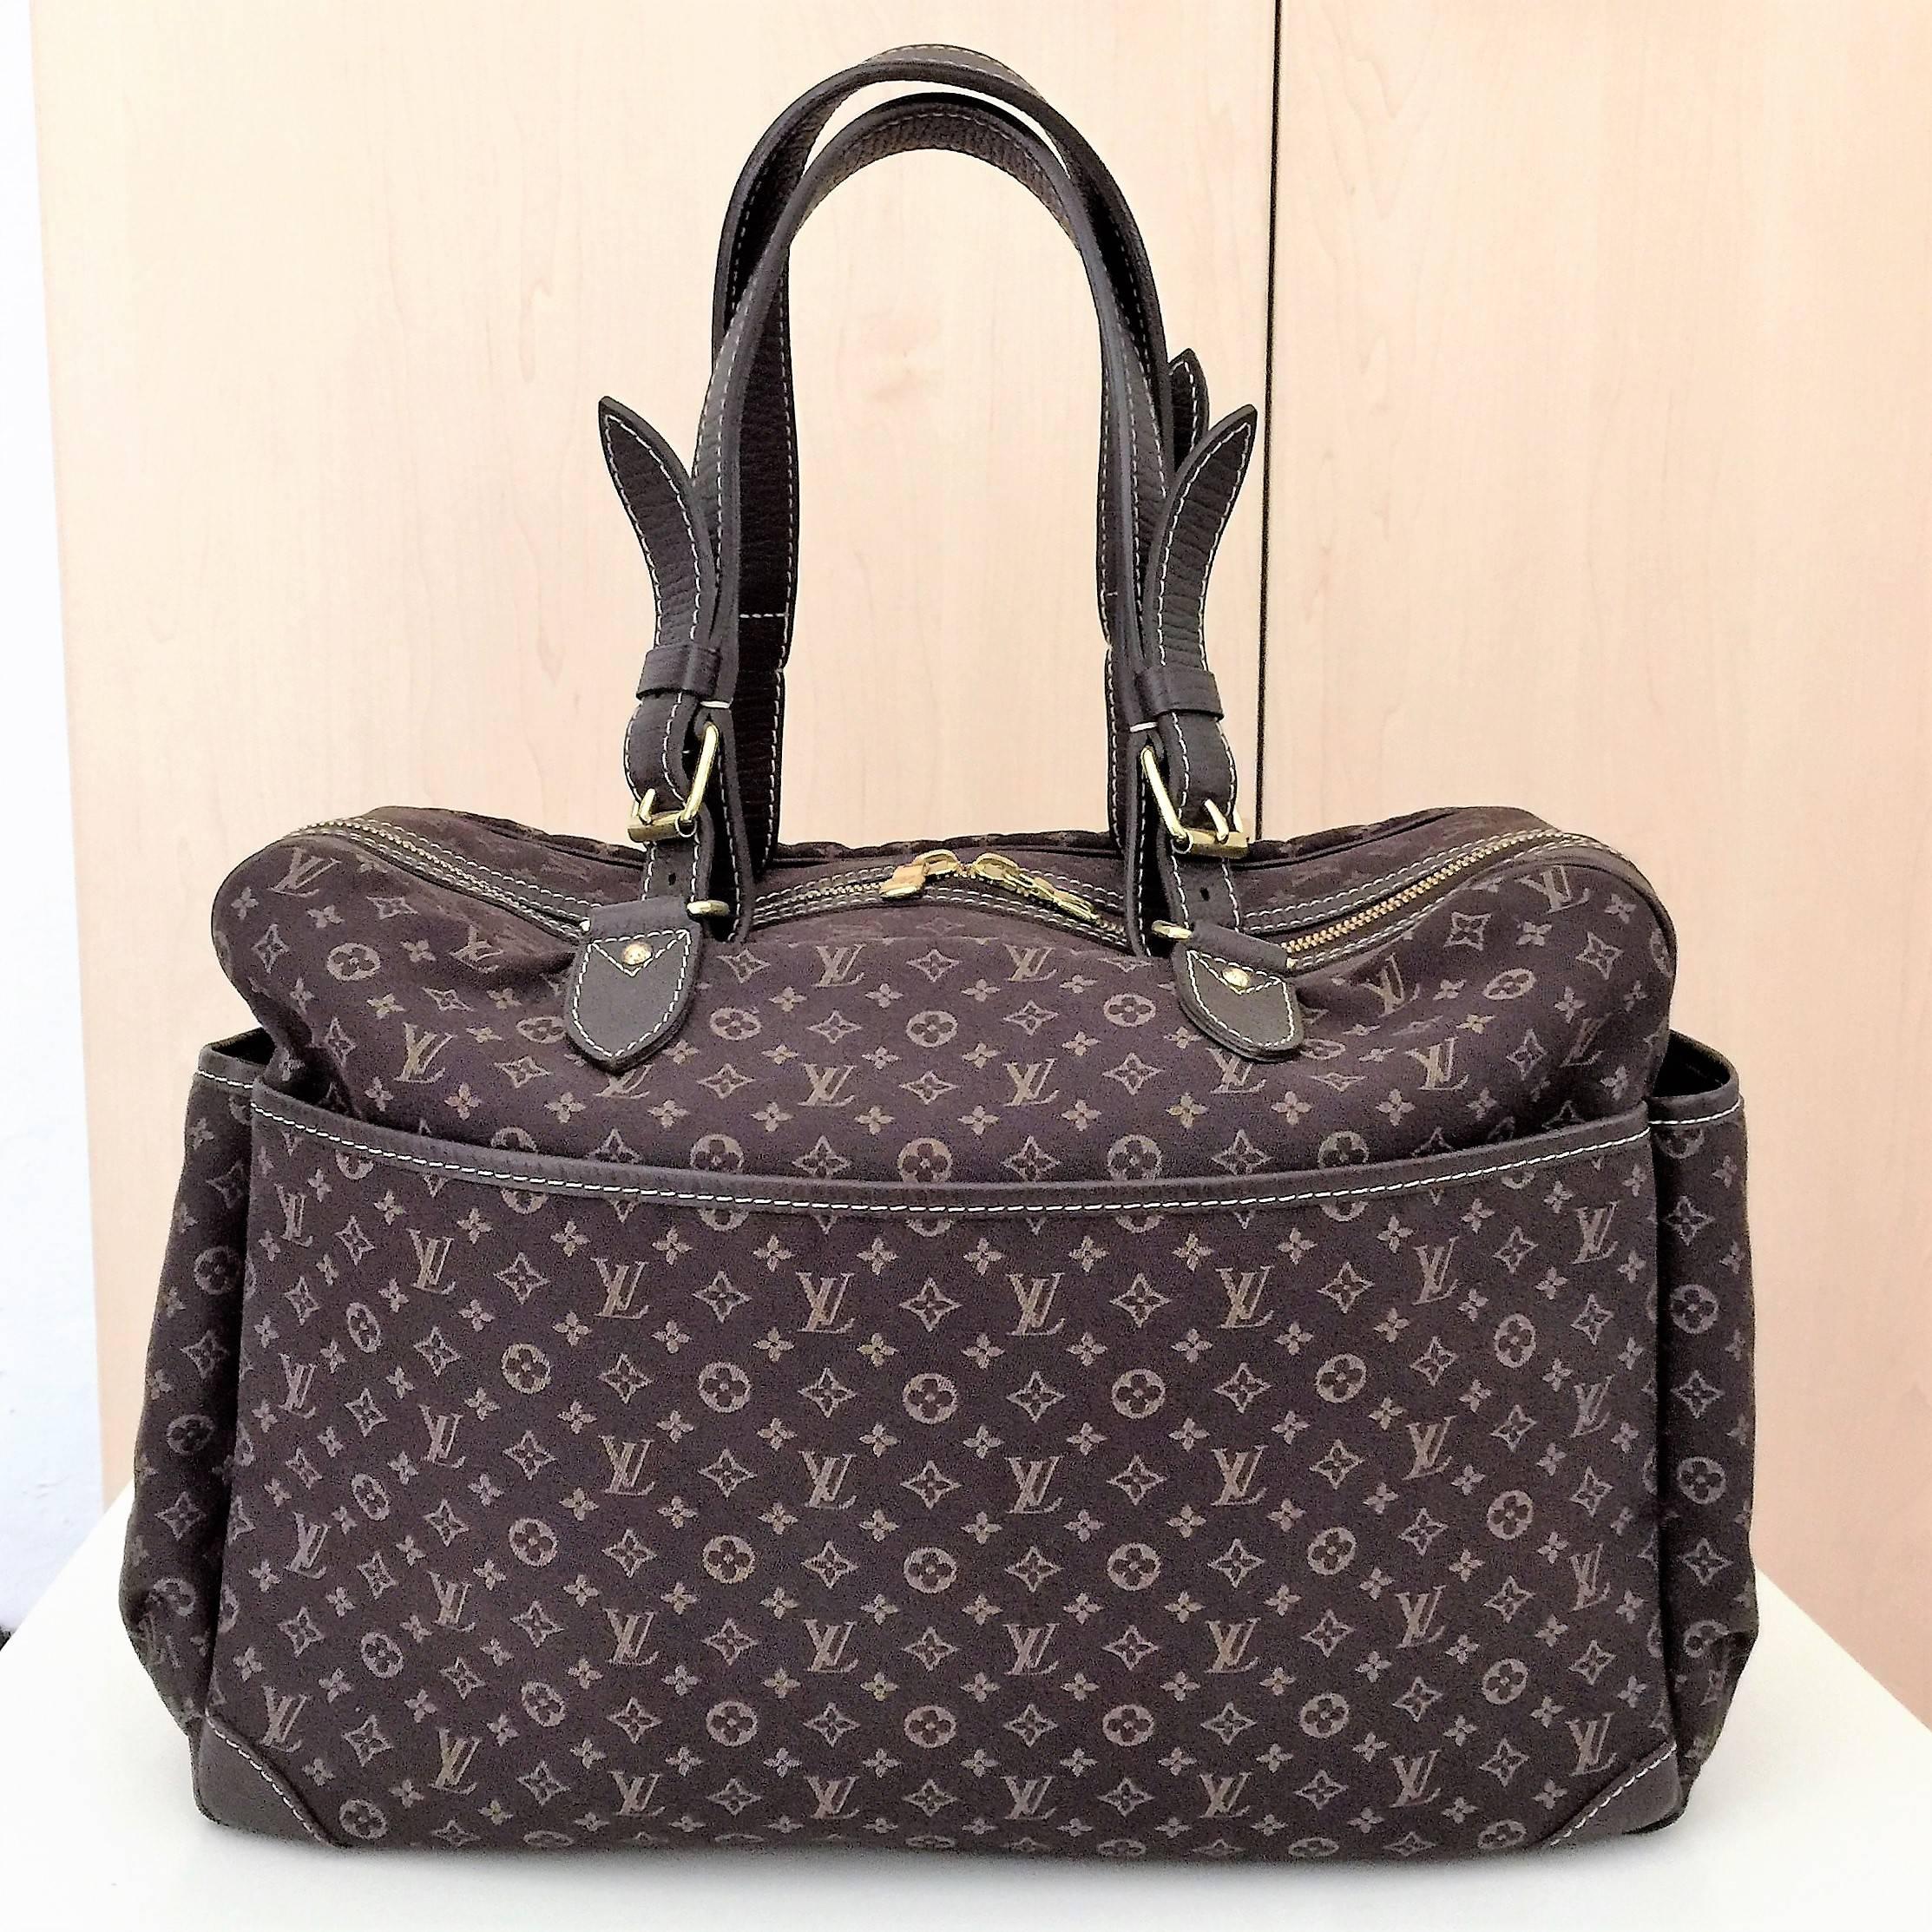 This authentic Louis Vuitton mini diaper Mini Lin Sac a Langer Diaper bag features ebene brown monogram mini lin canvas  (58% cotton, 24% linen, and 18% polyamide). The bag has leather adjustable handles, two zippered pockets on the front and a